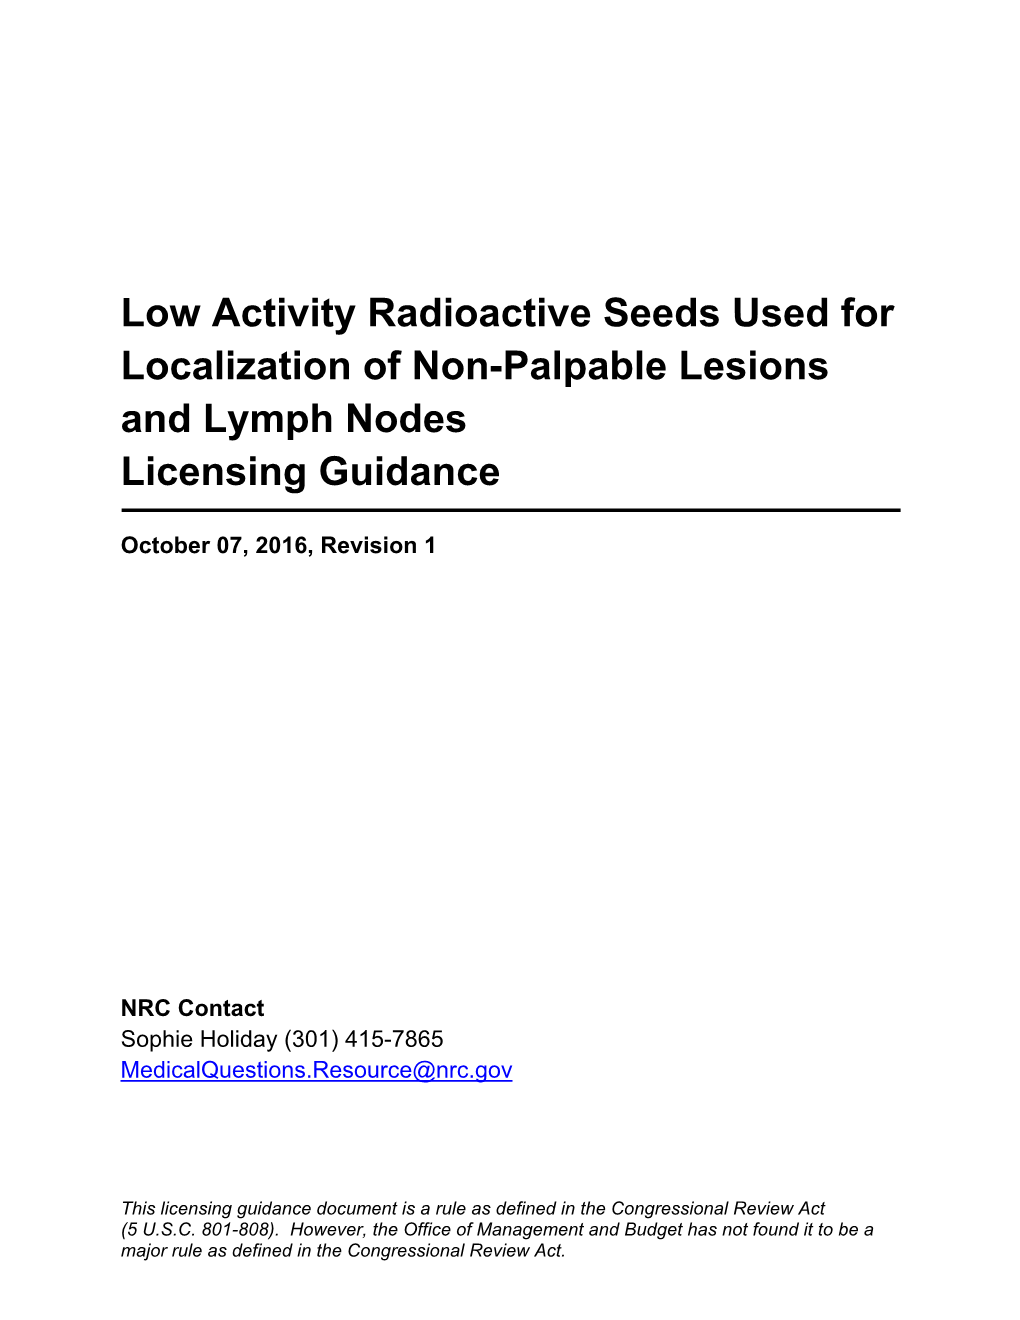 Low Activity Radioactive Seeds Used for Localization of Non-Palpable Lesions and Lymph Nodes Licensing Guidance, Revision 1